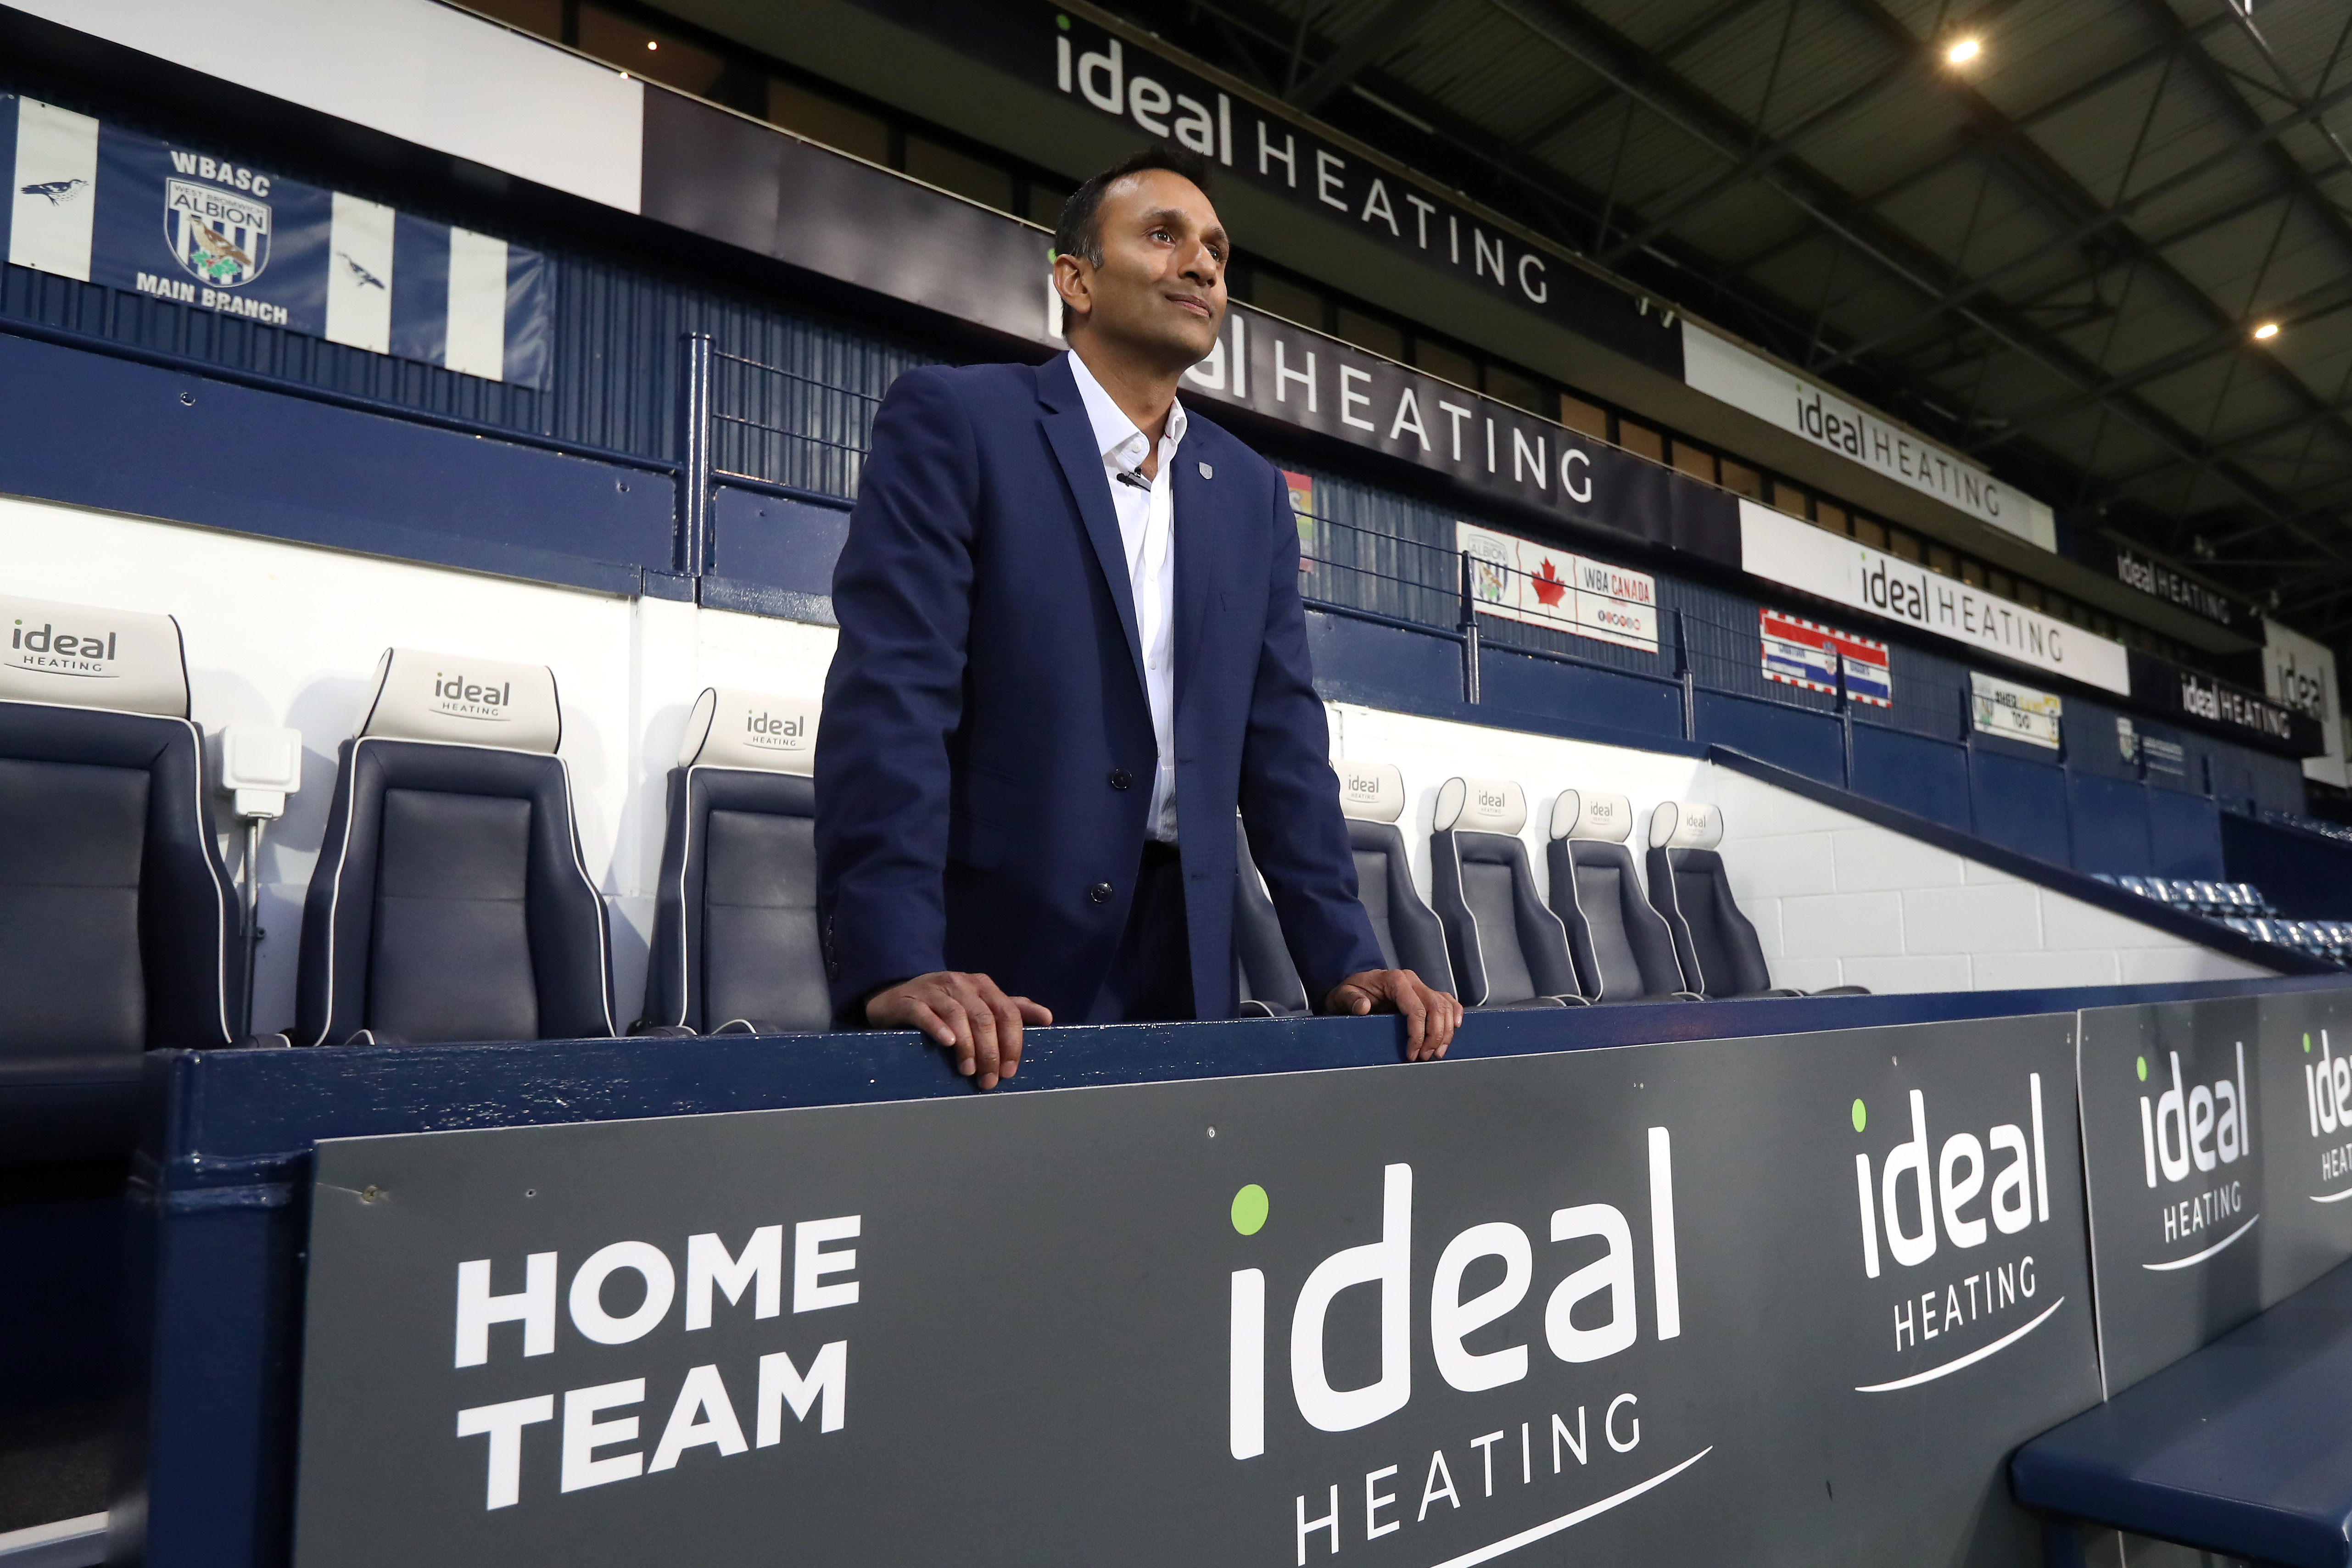 Shilen Patel stood in a suit in the home dugout at The Hawthorns looking out on to the pitch